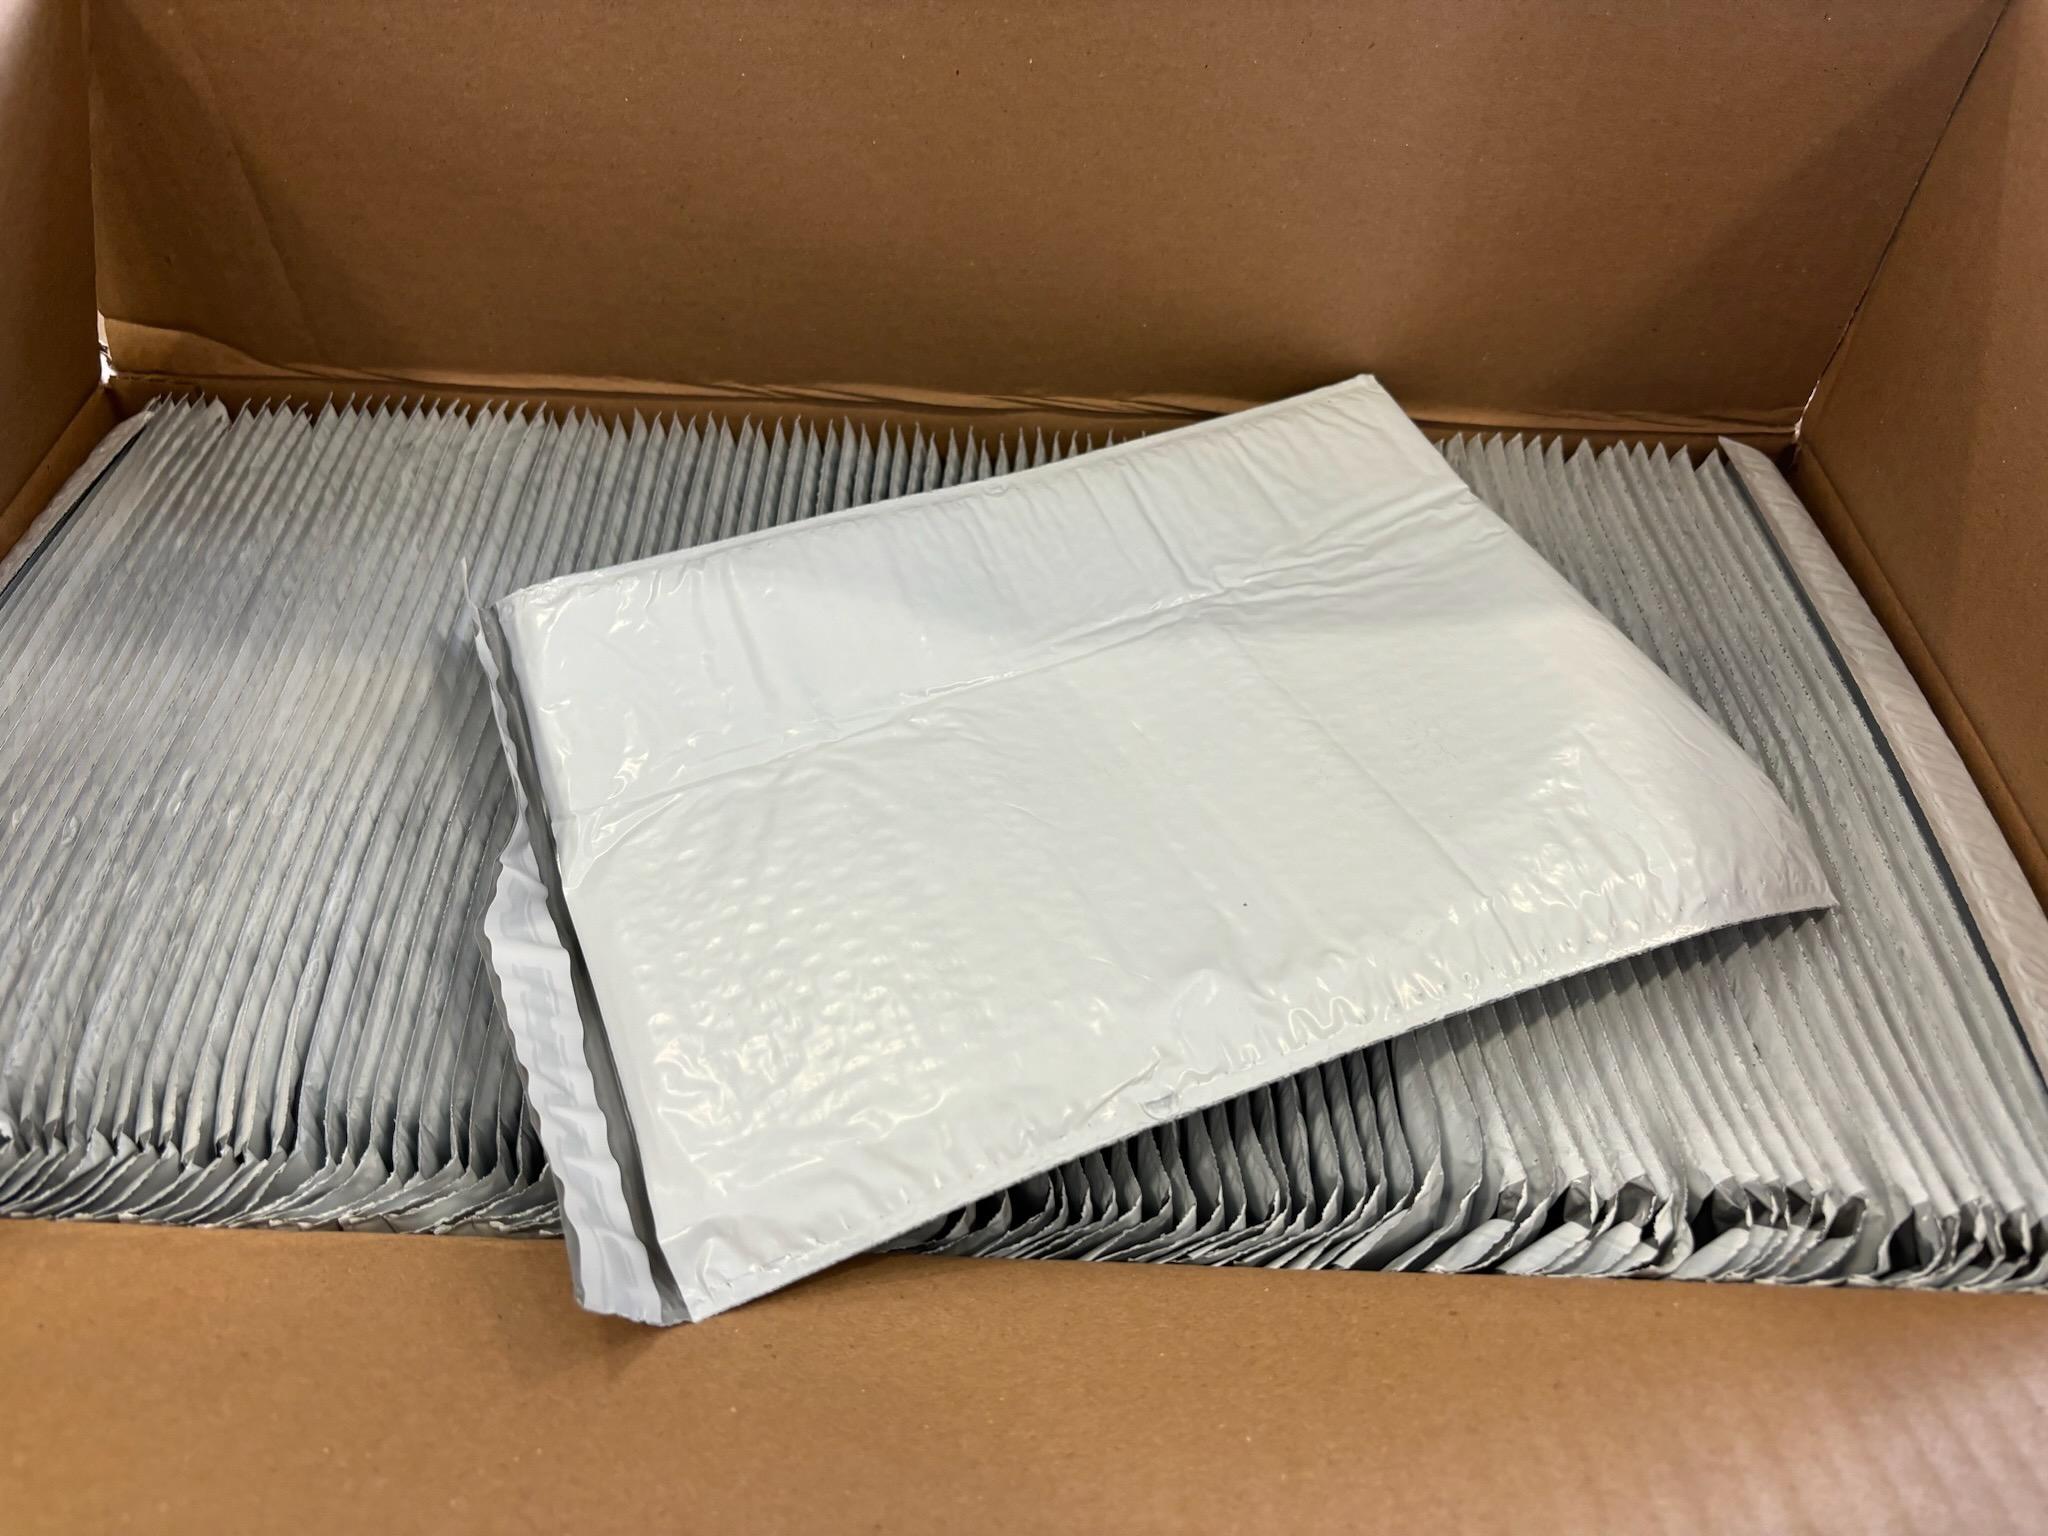 Padded Mailers